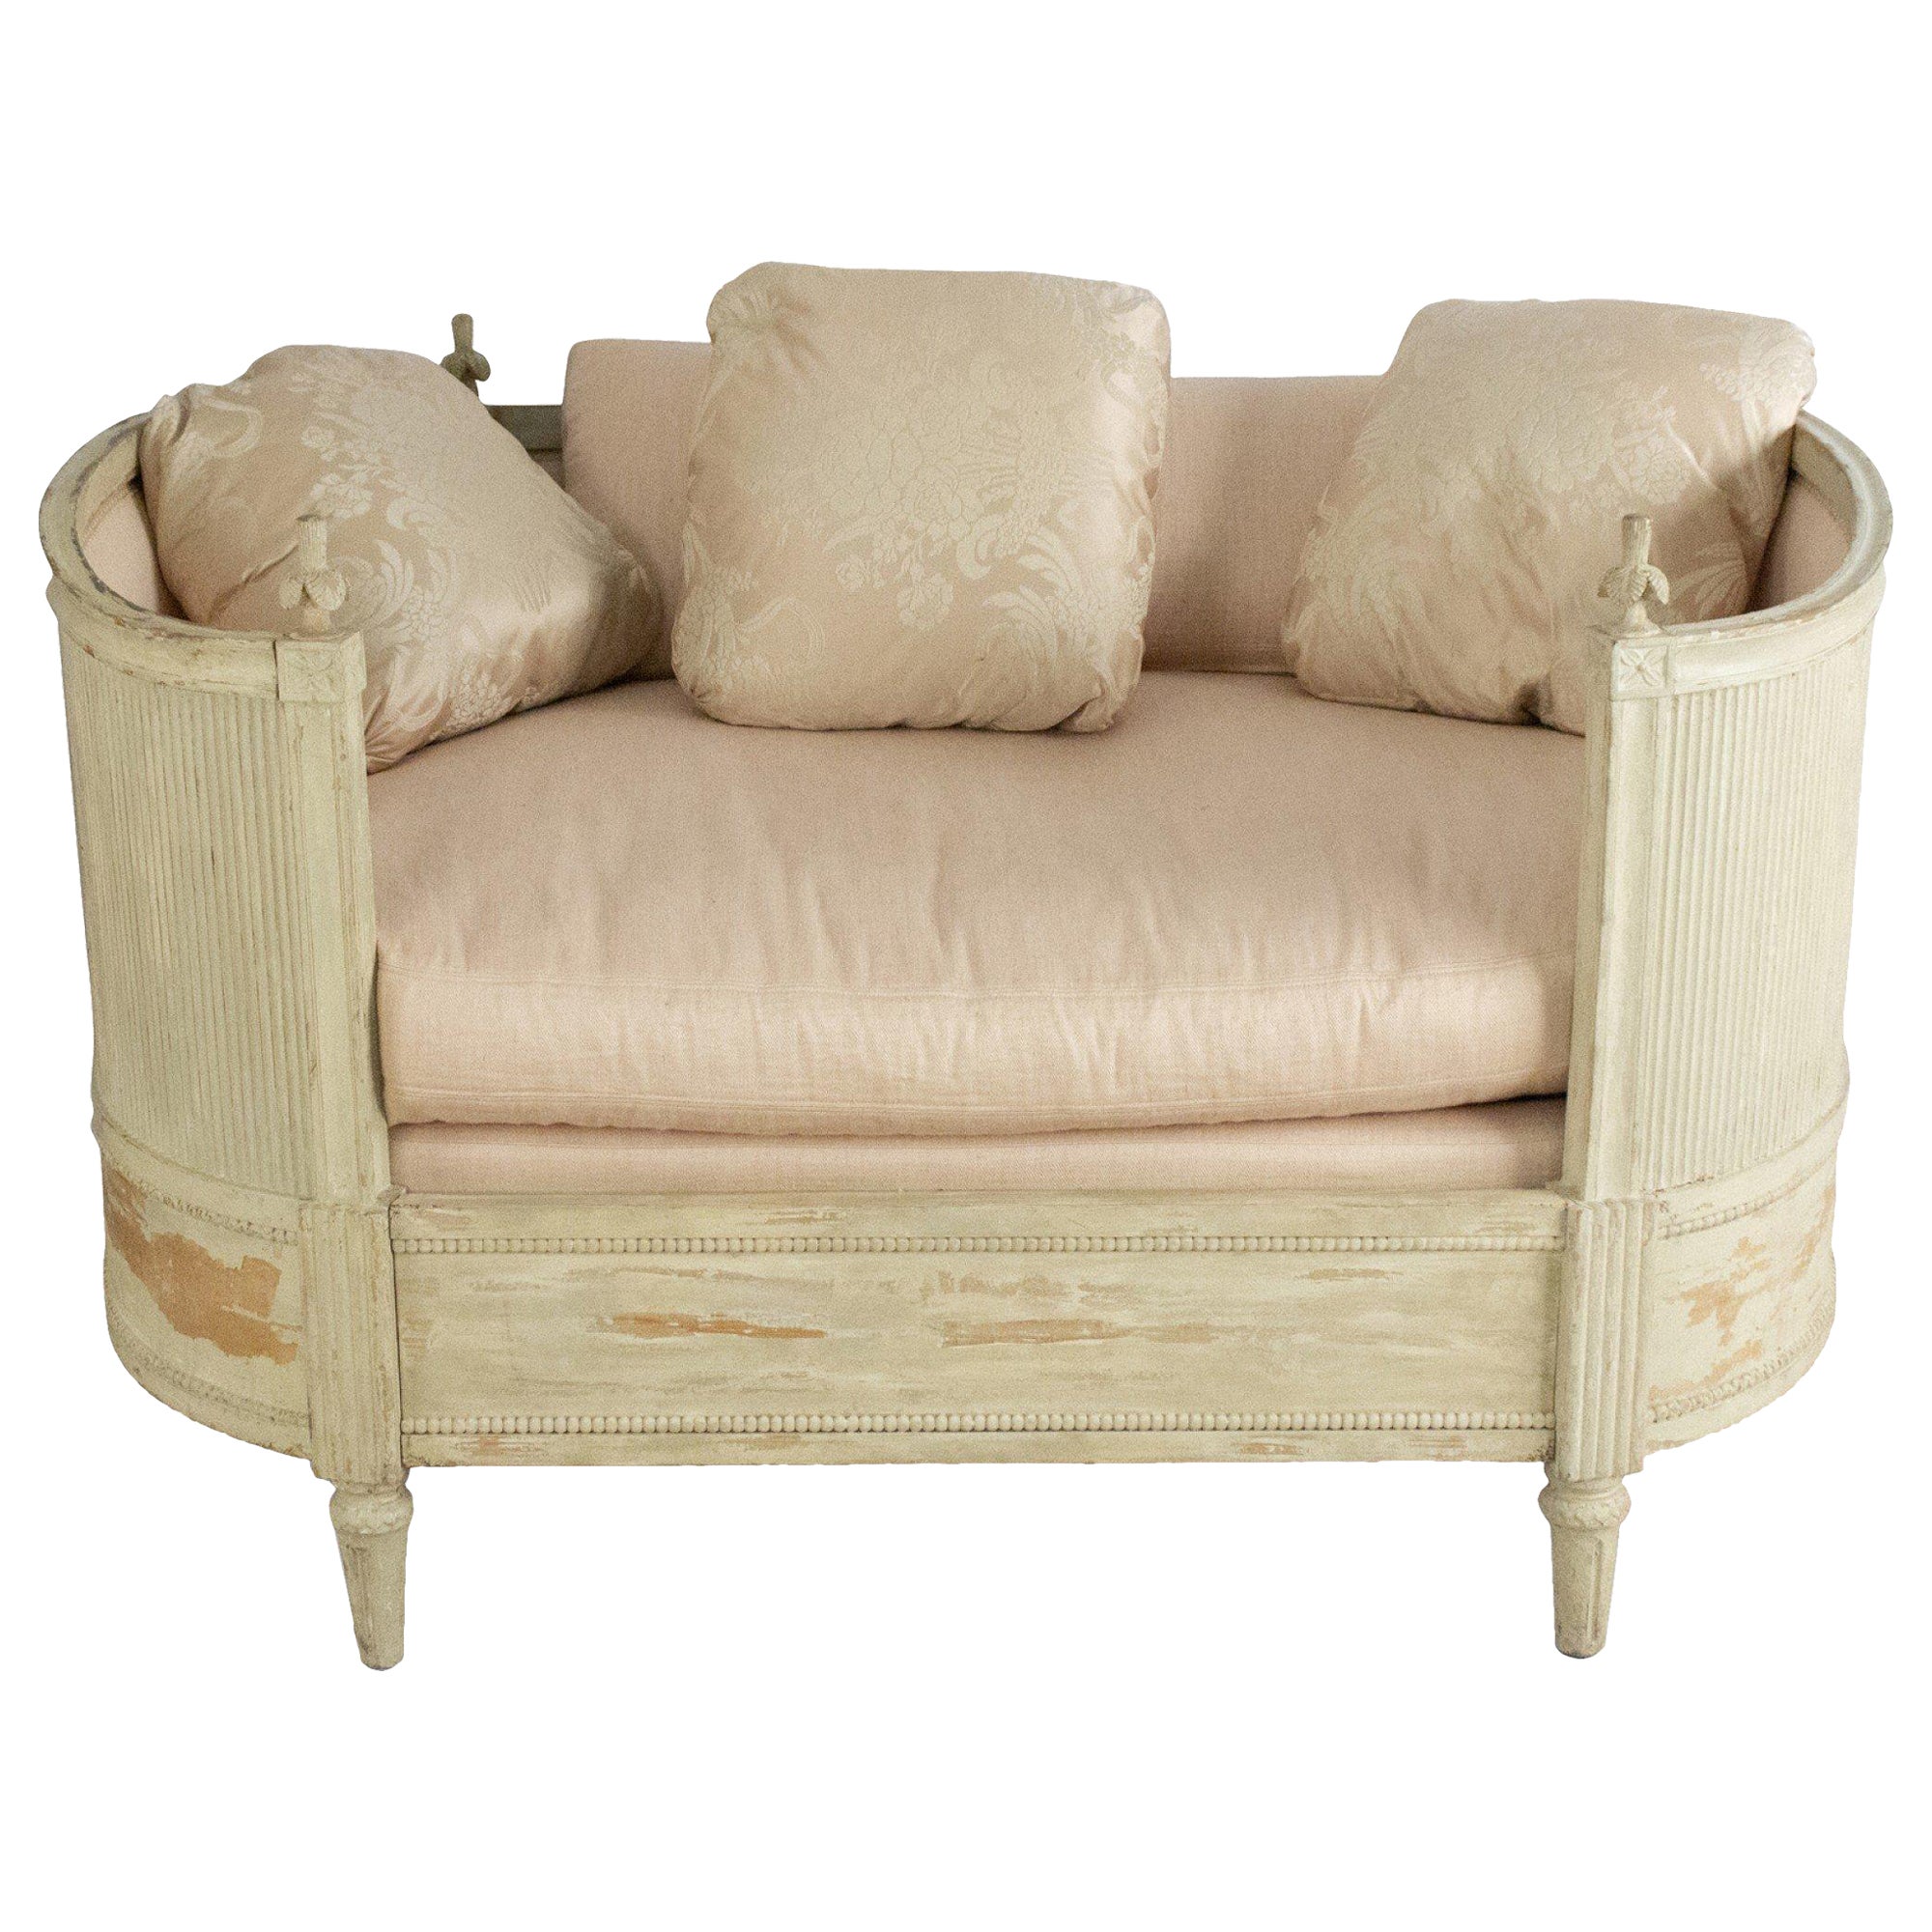 Louis XVI Style Small White Painted Wooden Rounded Wall Daybed For Sale